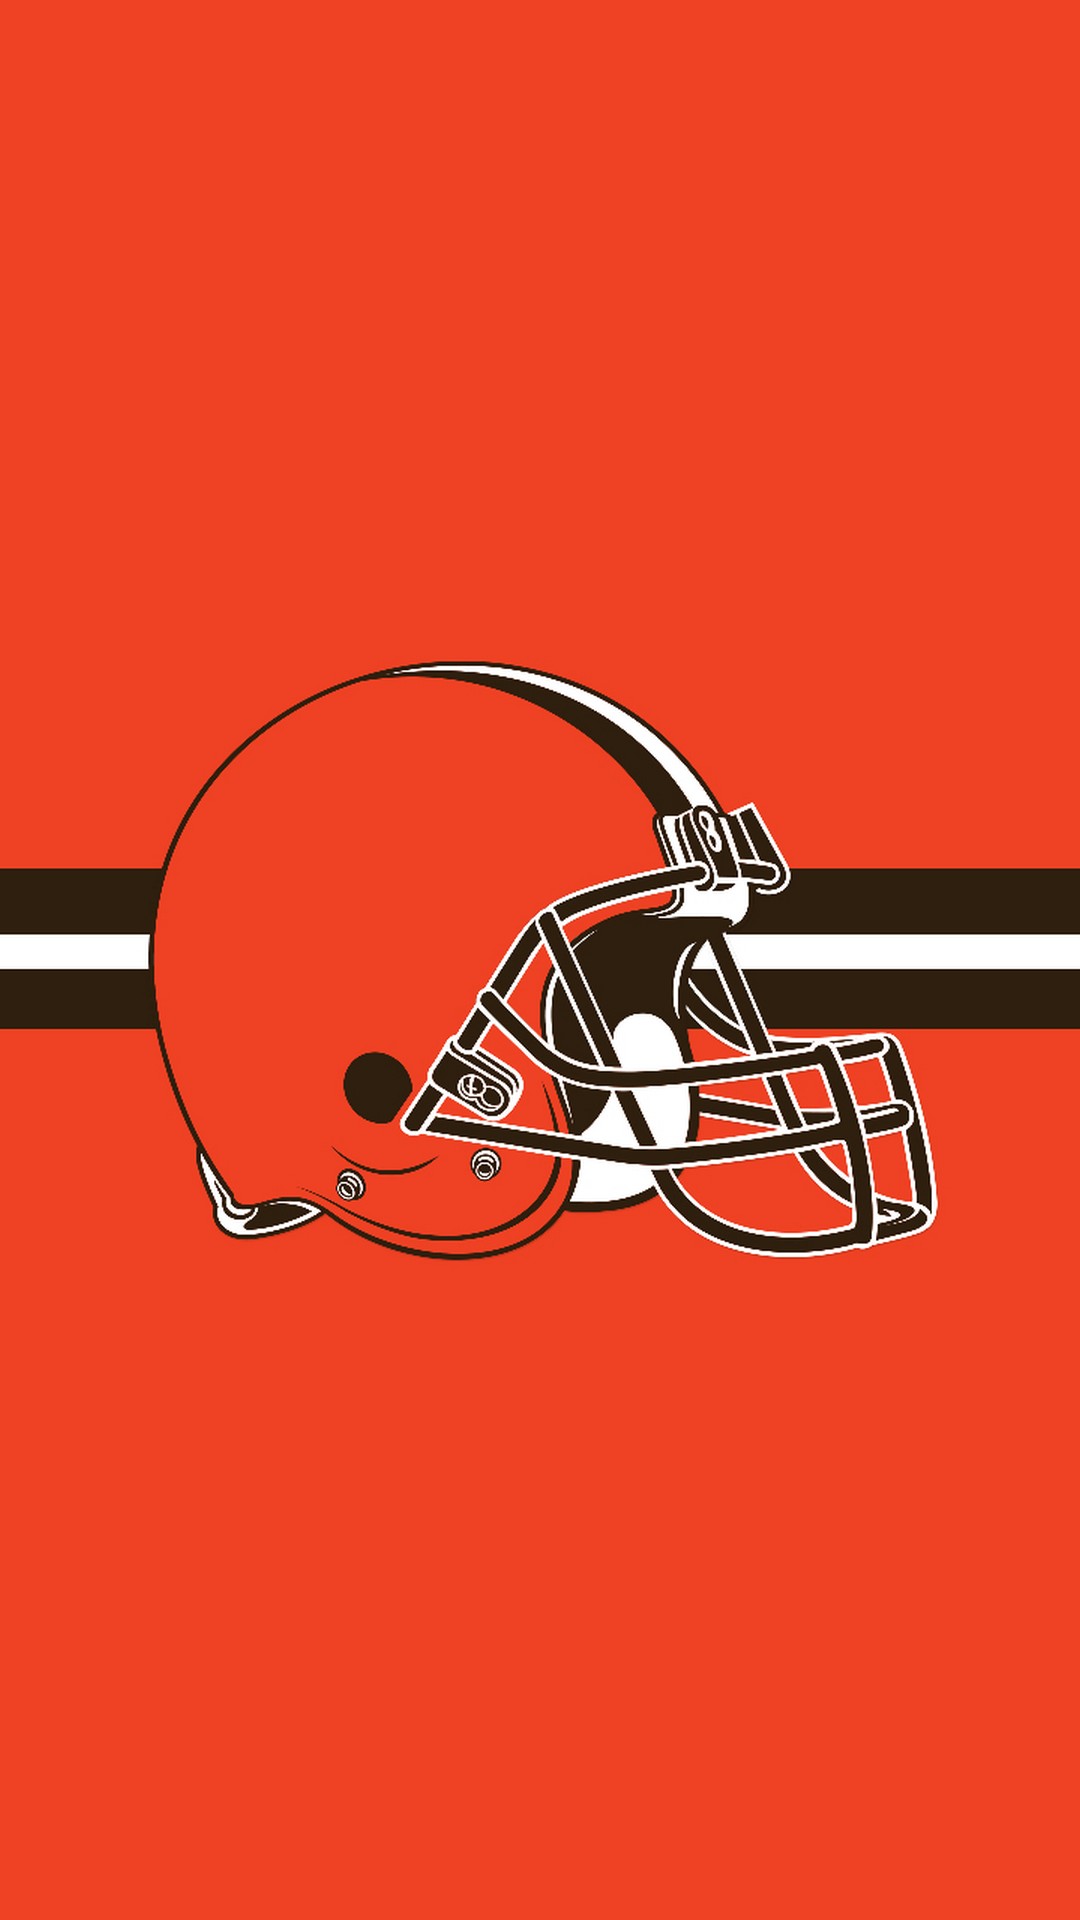 Cleveland Browns iPhone 7 Plus Wallpaper With high-resolution 1080X1920 pixel. Download and set as wallpaper for Apple iPhone X, XS Max, XR, 8, 7, 6, SE, iPad, Android